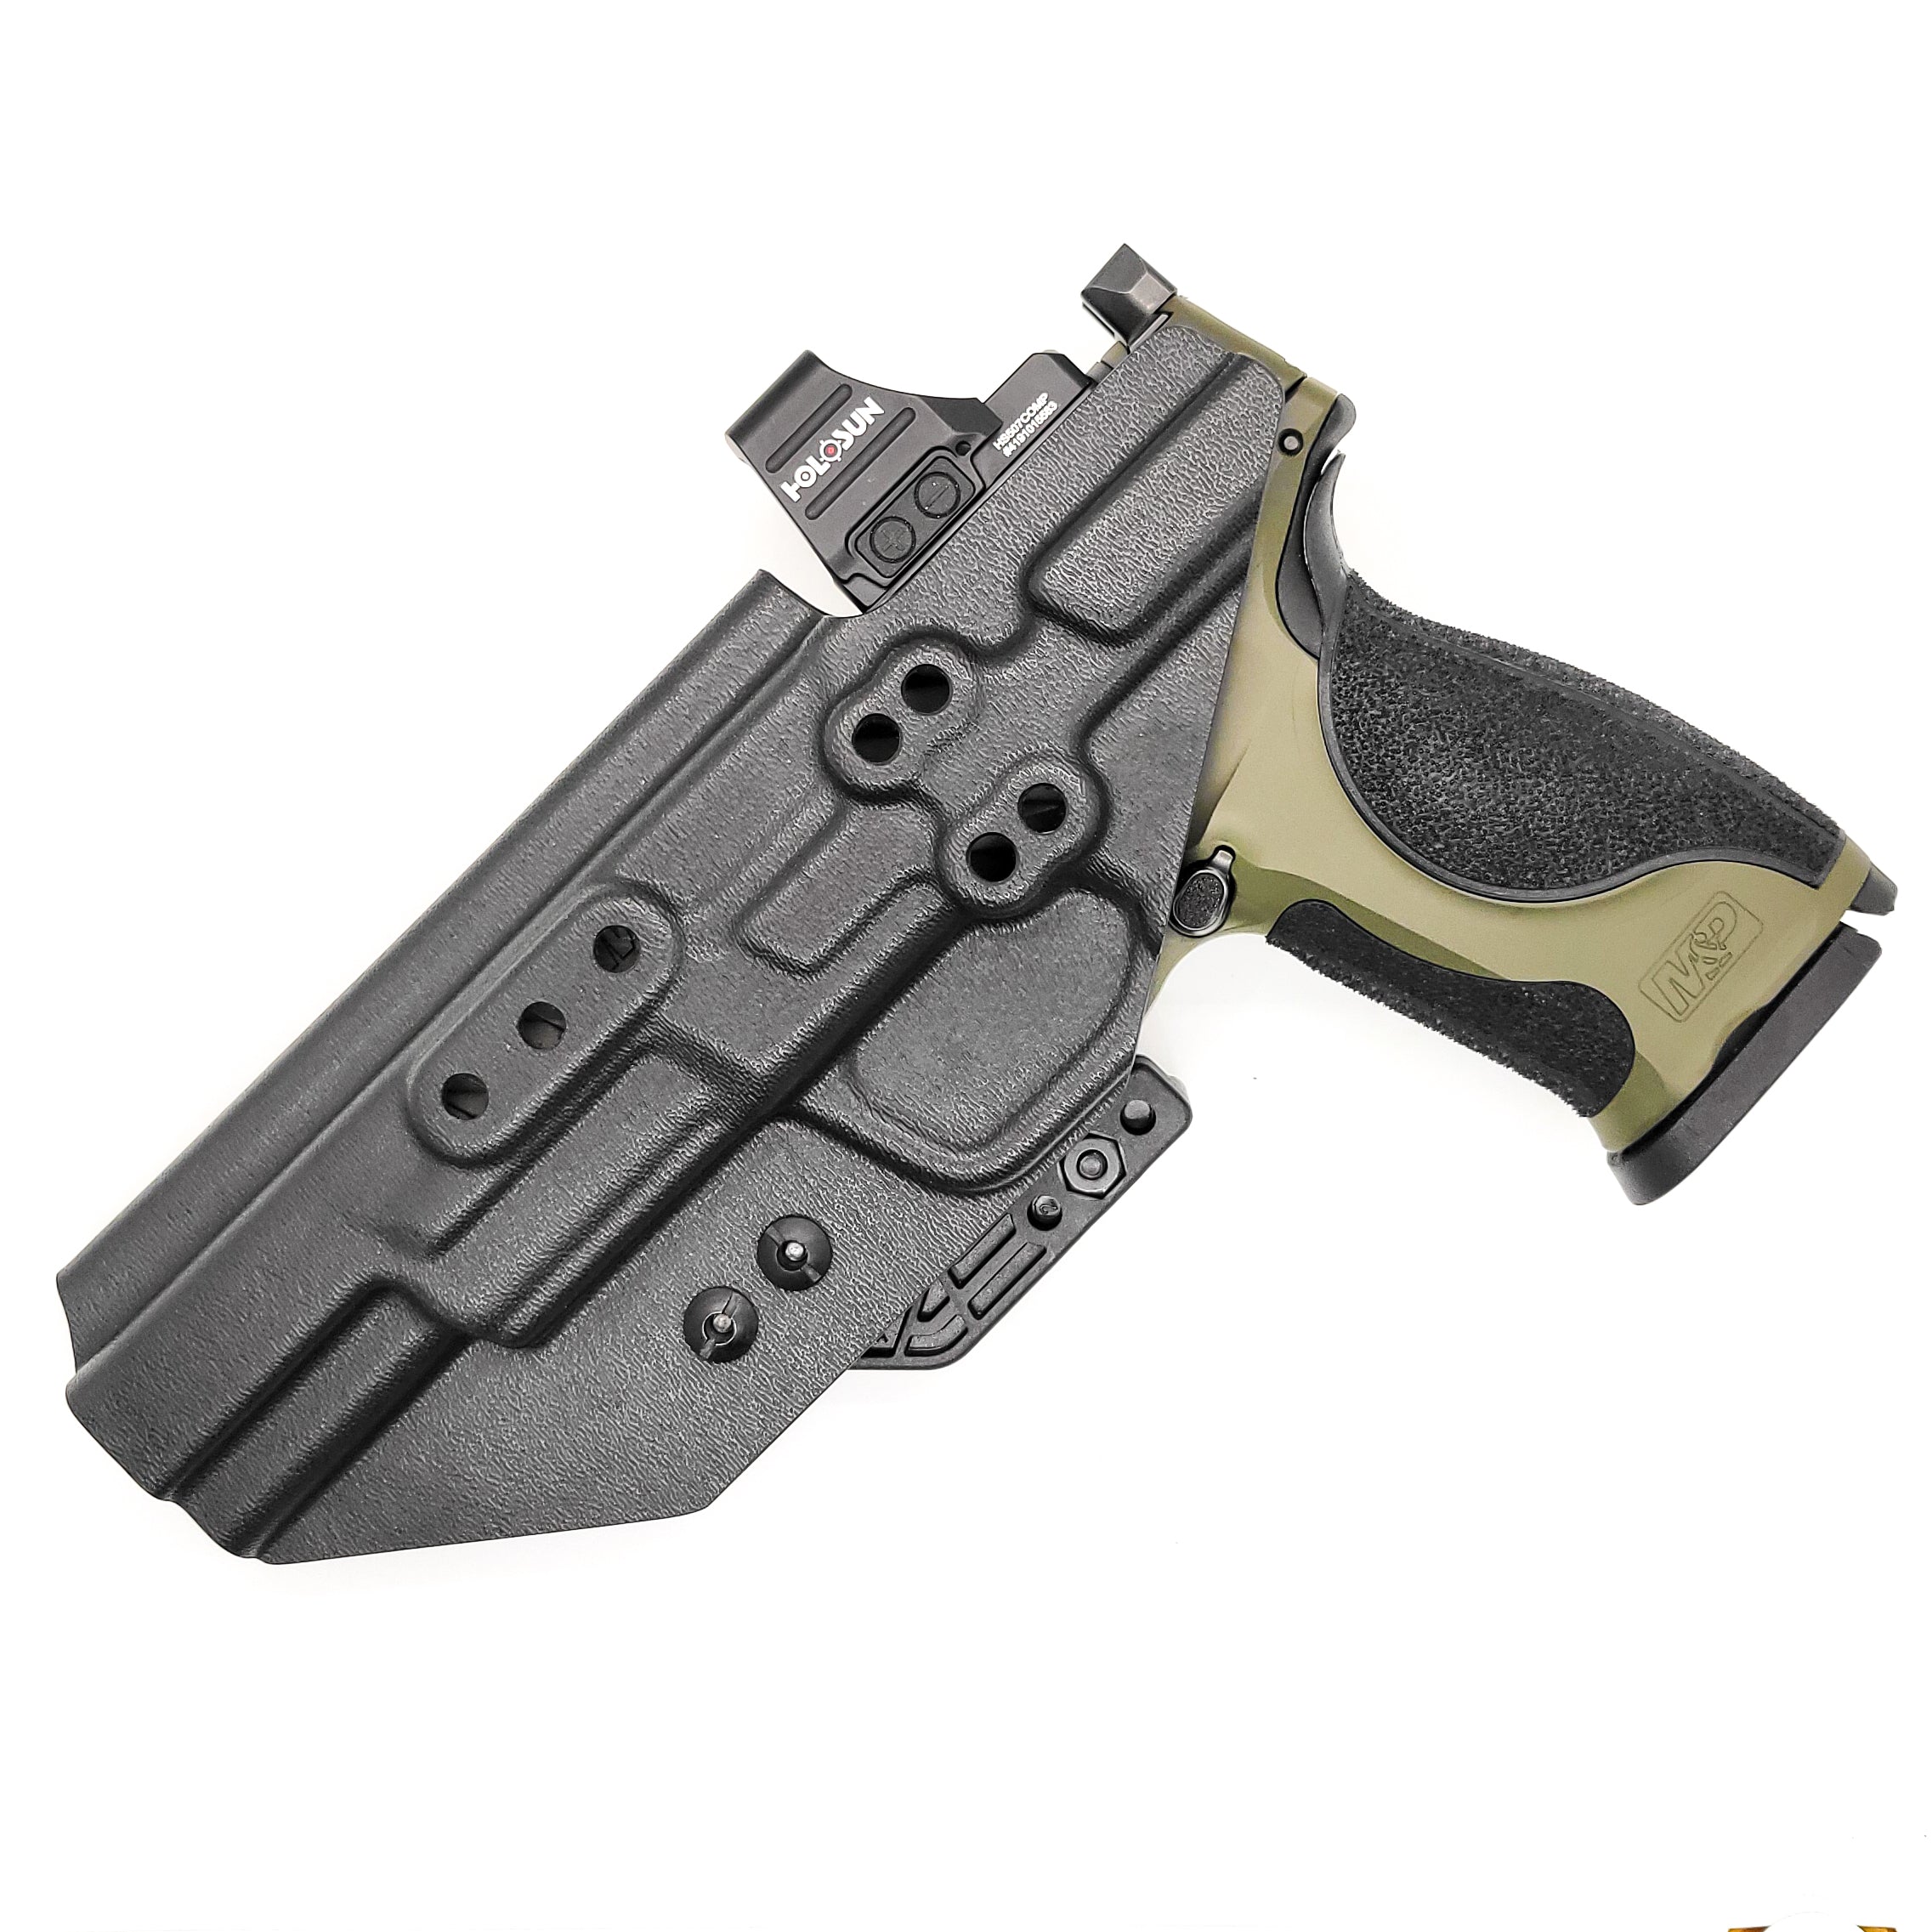 For the Best IWB AIWB Inside Waistband Kydex Taco Holster designed to fit the Smith & Wesson 2023 SPEC Series M&P 9 Metal M2.0 9mm pistol, shop Four Brothers Holsters. Full sweat guard, adjustable retention, profiled for a red dot sight. Proudly made in the USA for veterans and law enforcement.